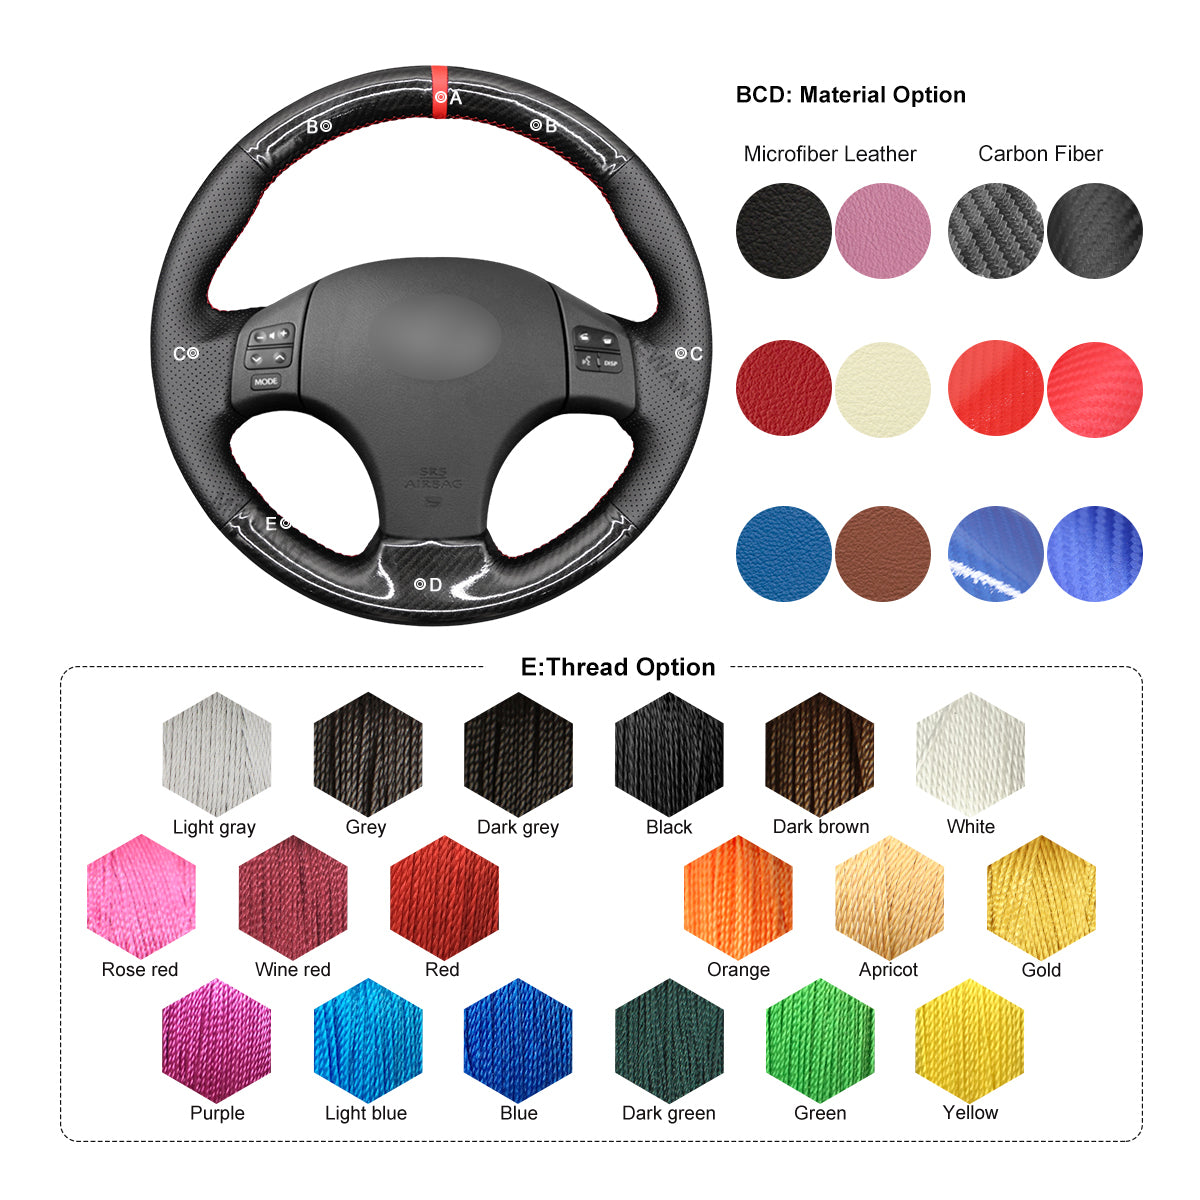 MEWANT DIY Suede Leather Carbon Fiber Car Steering Wheel Cover for Lexus IS 250 250C 350 350C IS F Sport 2006-2013